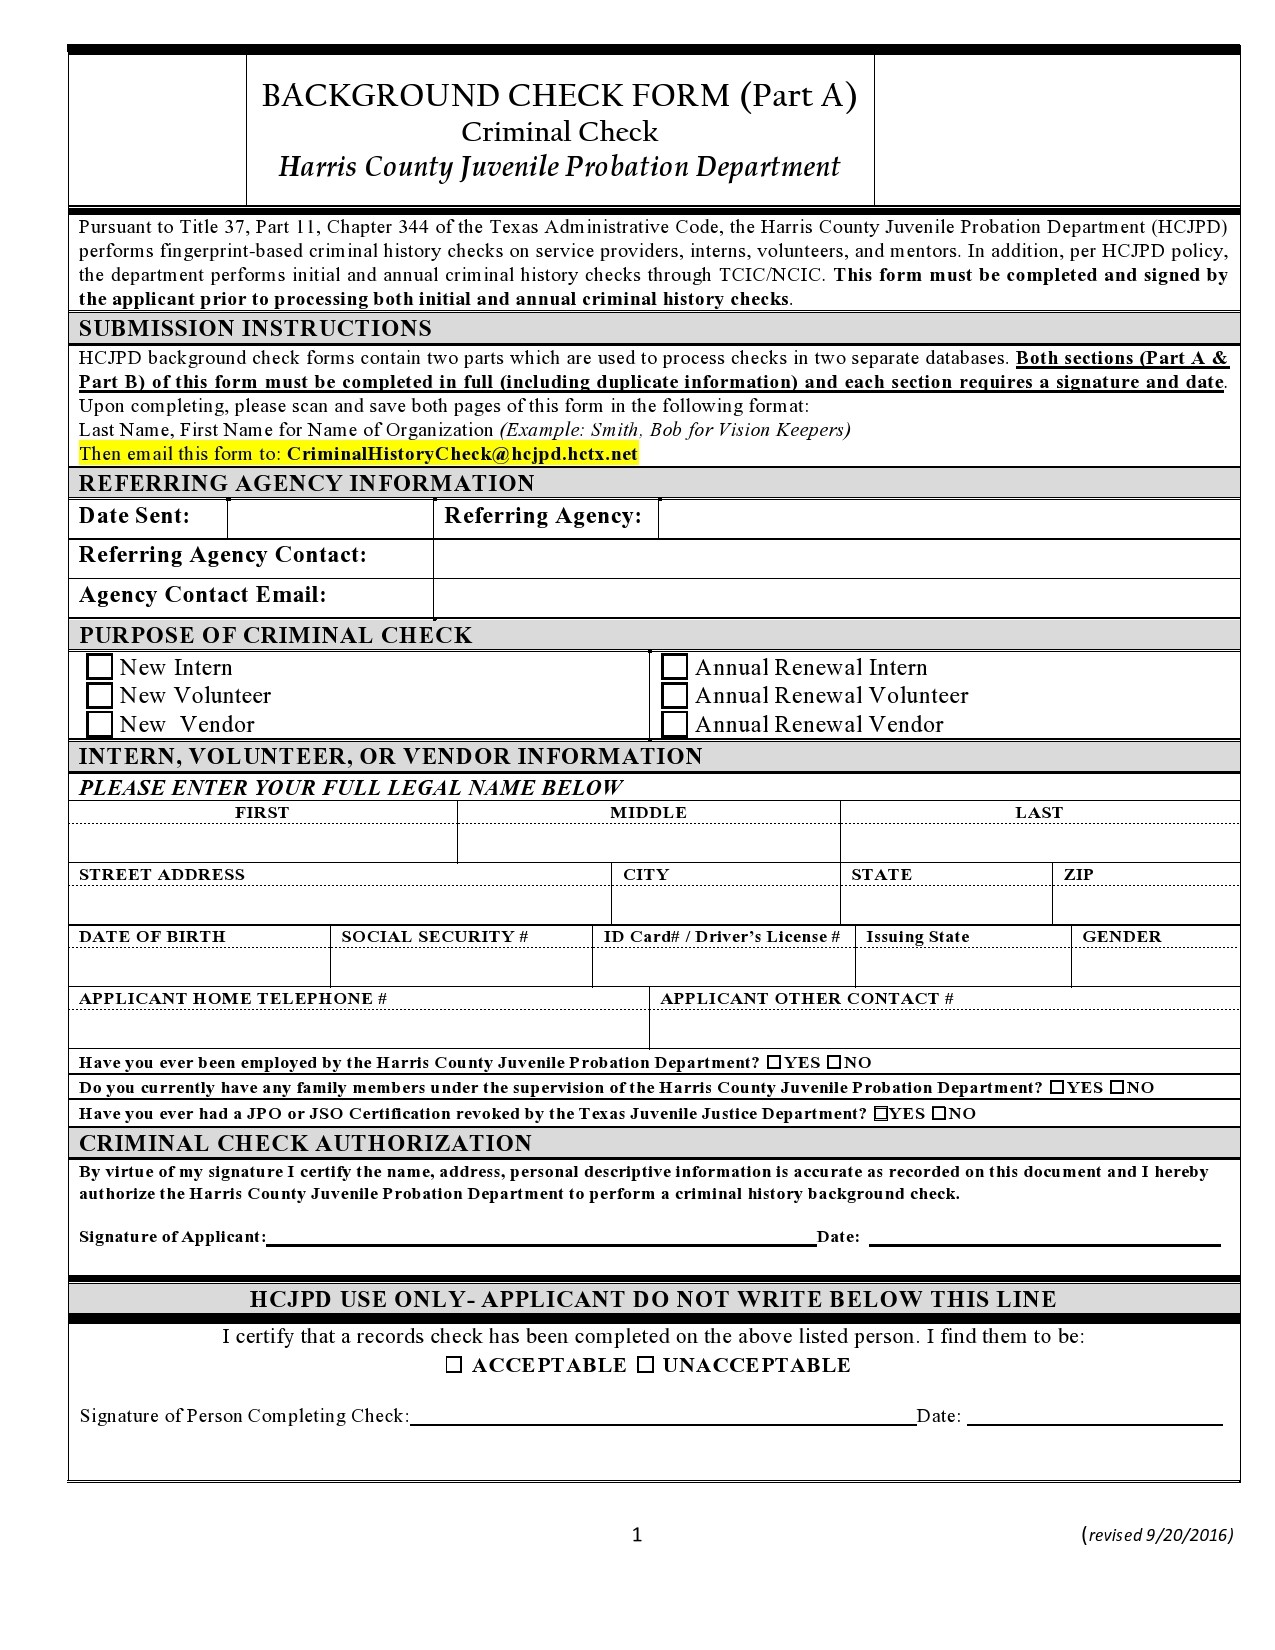 printable-background-check-agreement-form-printable-forms-free-online